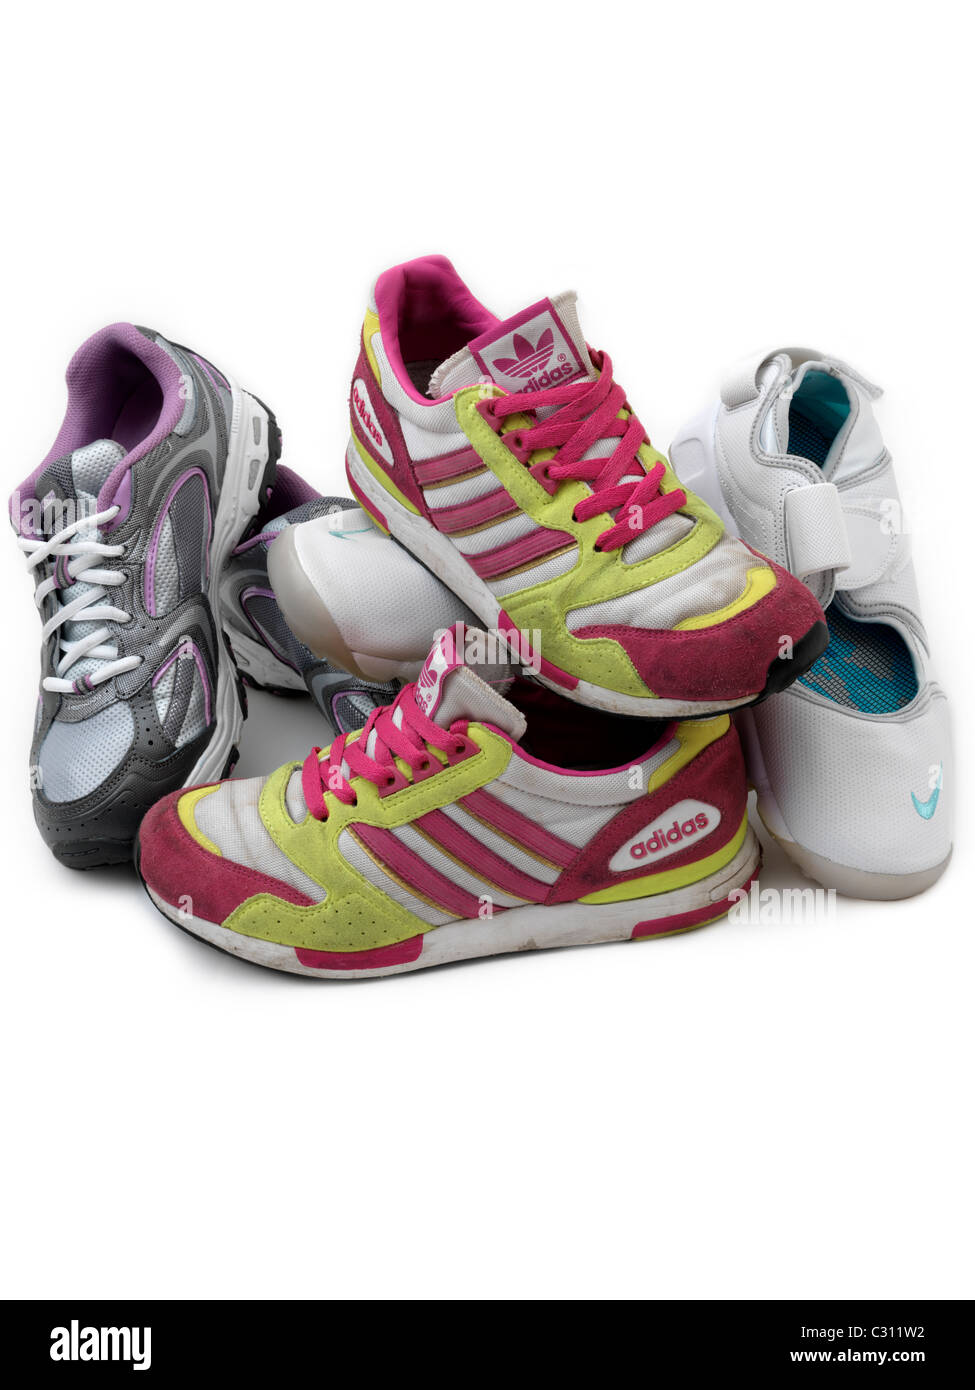 A Pile Of Trainers Adidas Ontario, Sketchers Sport And Nike Stock Photo ...